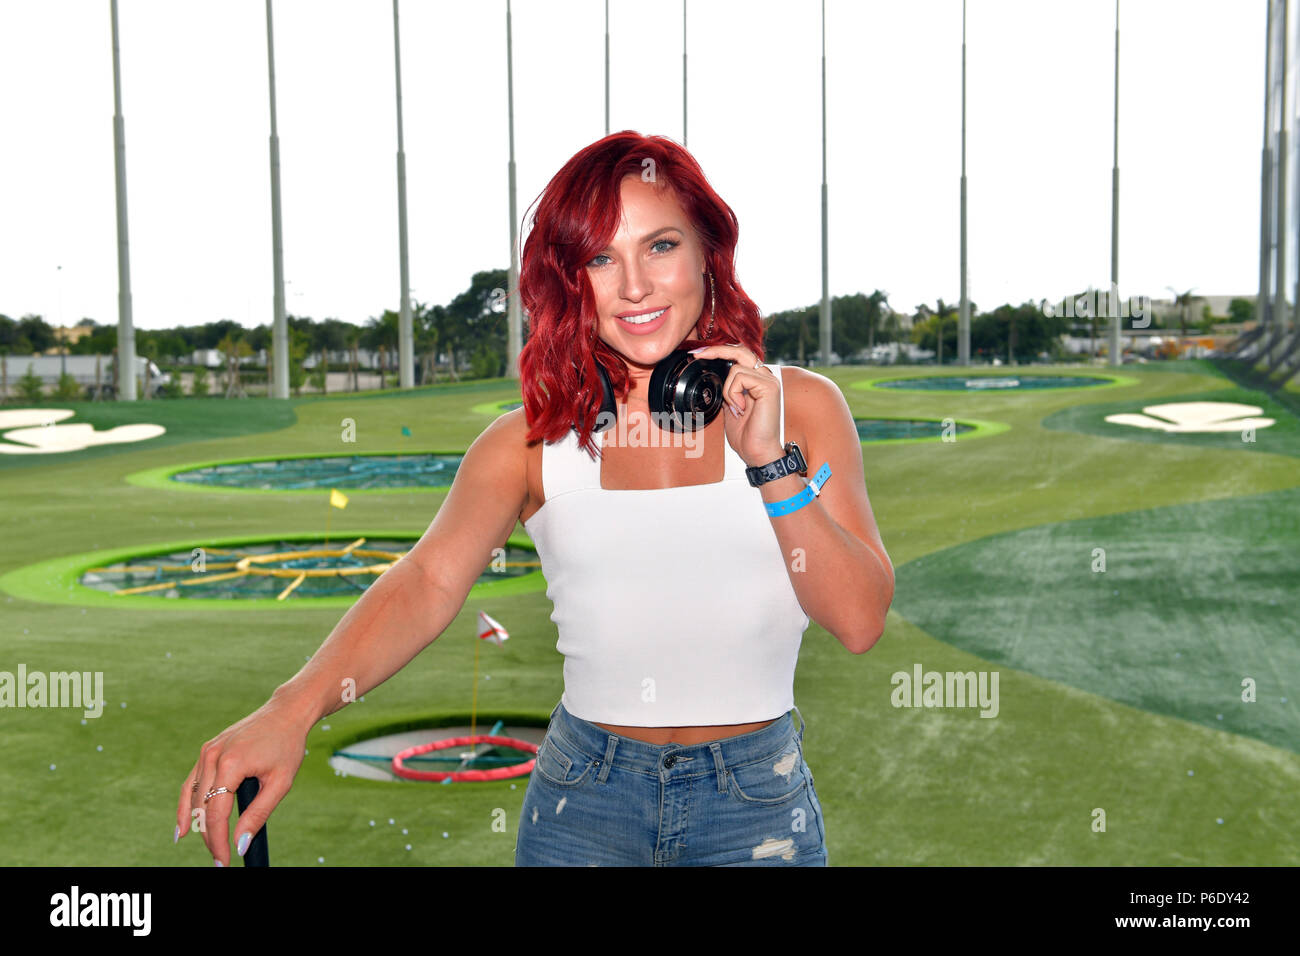 MIAMI GARDENS, FL - JUNE 30: Sharna May Burgess at the Topgolf during Dj Irie Weekend 2018 on June 30, 2018 in Miami, Florida   People:  Sharna May Burgess Stock Photo